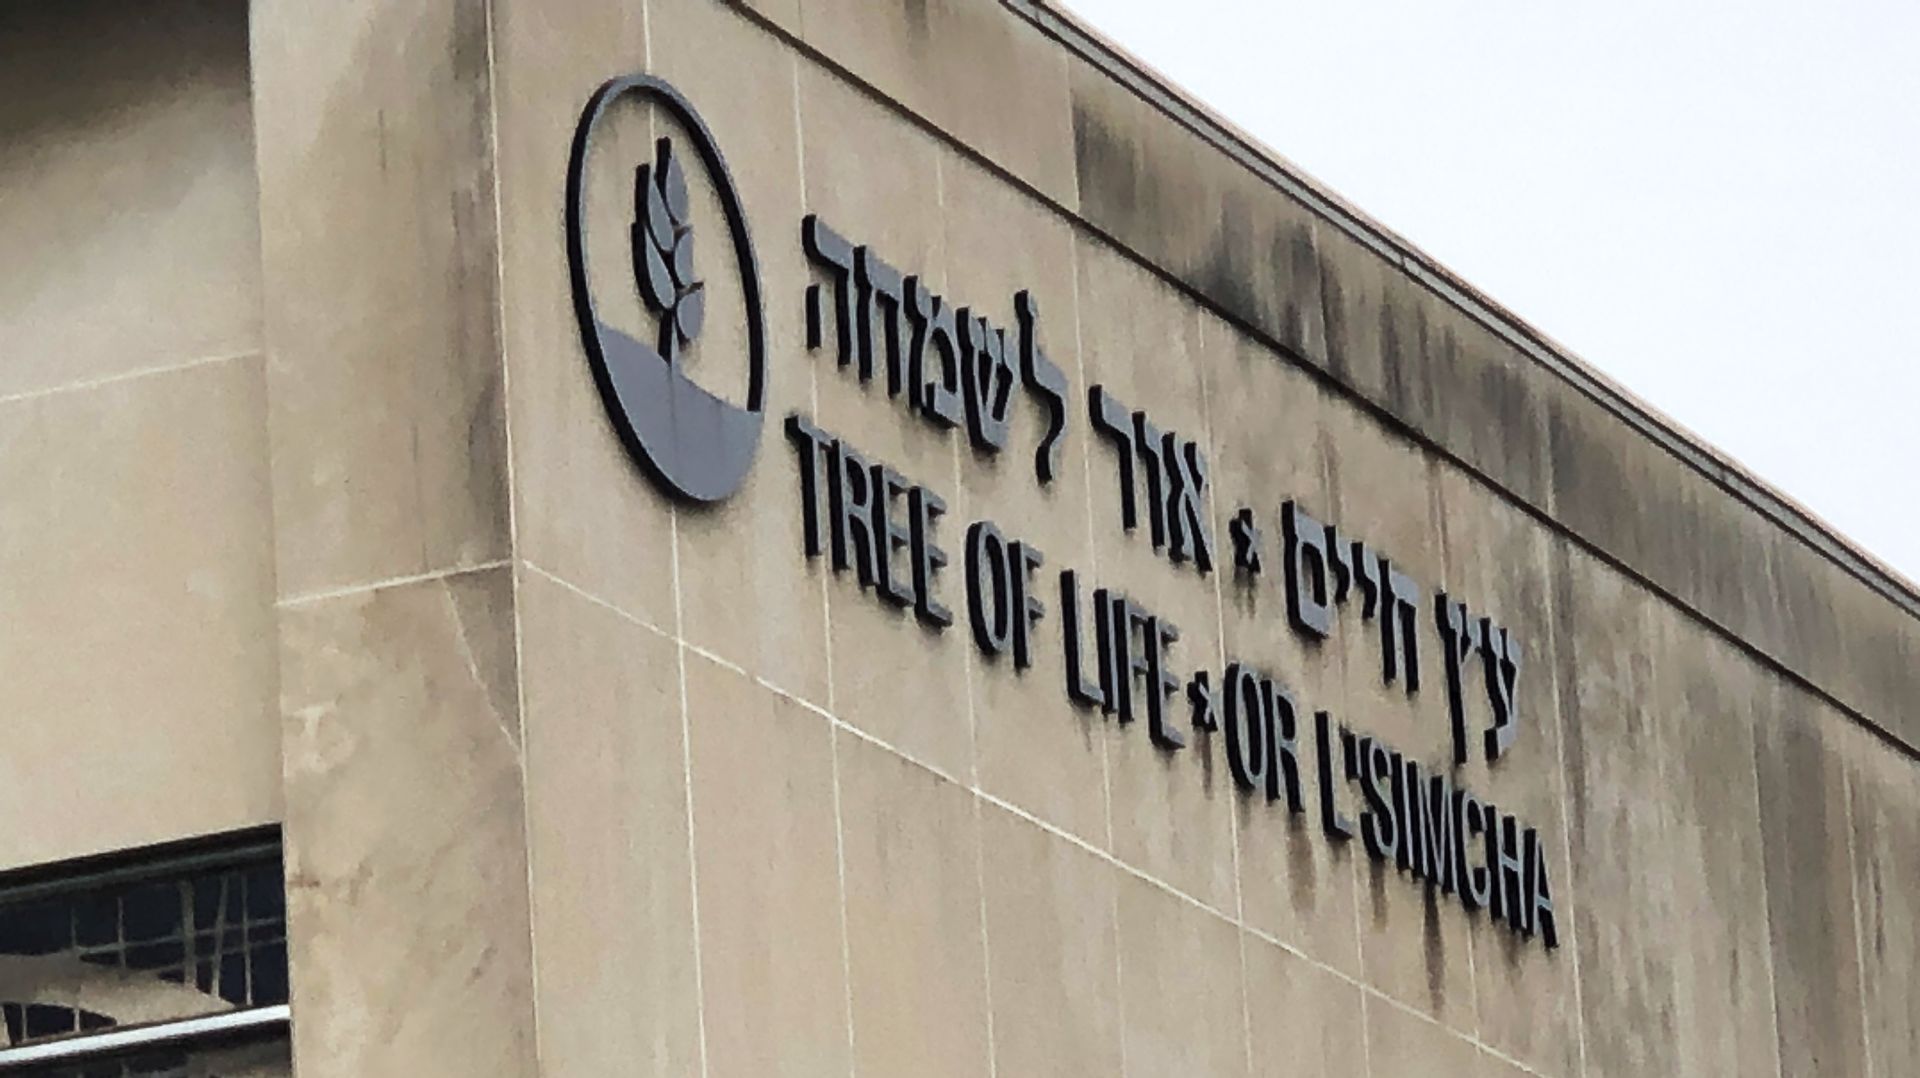 epa07125084 The exterior of the Tree of Life synagogue after a mass shooting in the Squirrel Hill neighborhood of Pittsburgh, Pennsylvania, USA, 27 October 2018. Media reports indicate as many as 10 people have been killed and the gunman was captured after wounding three responsing police officers.  EPA/VINCENT PUGLIESE